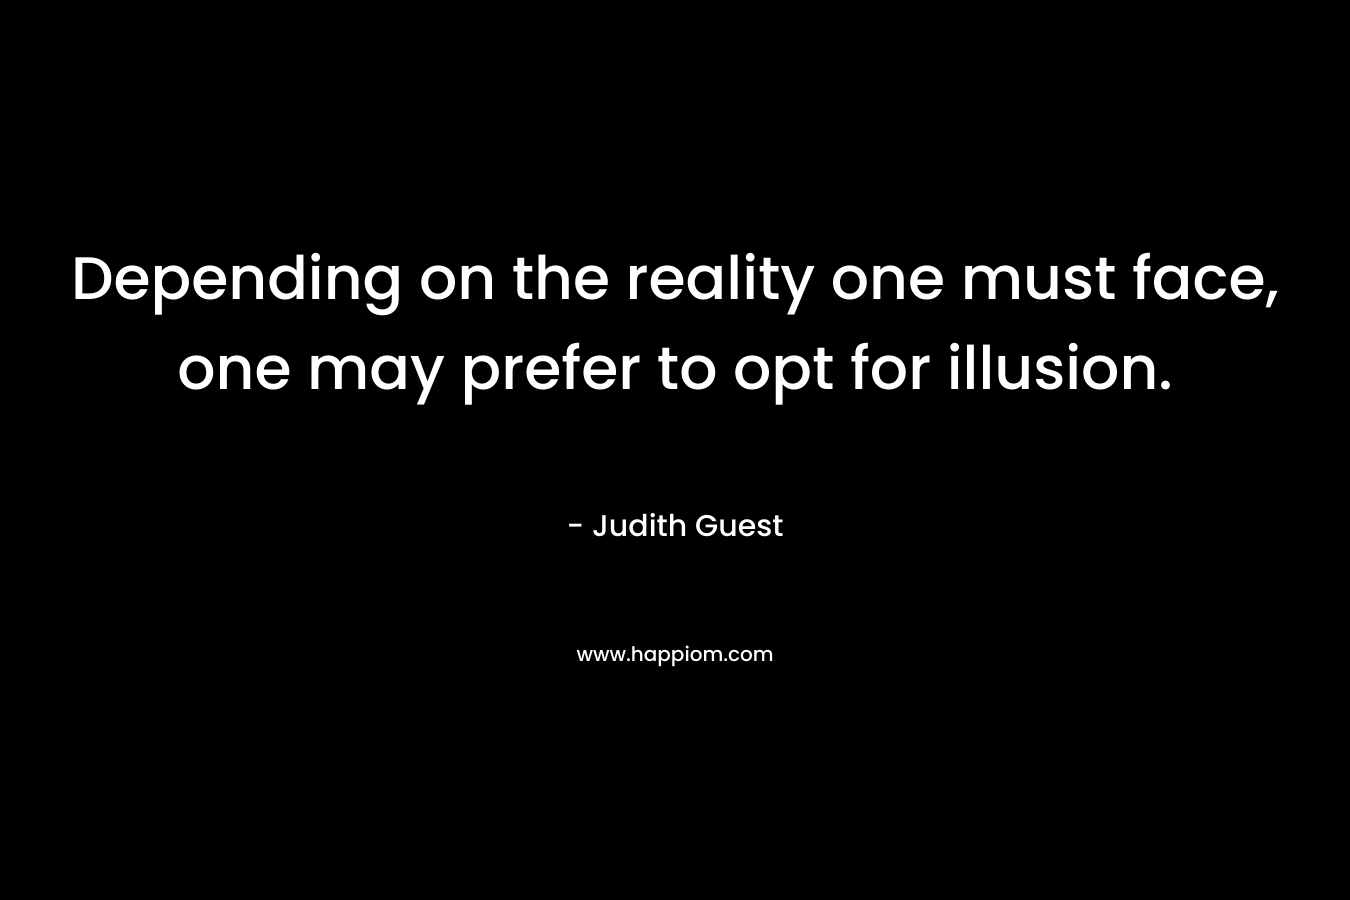 Depending on the reality one must face, one may prefer to opt for illusion.